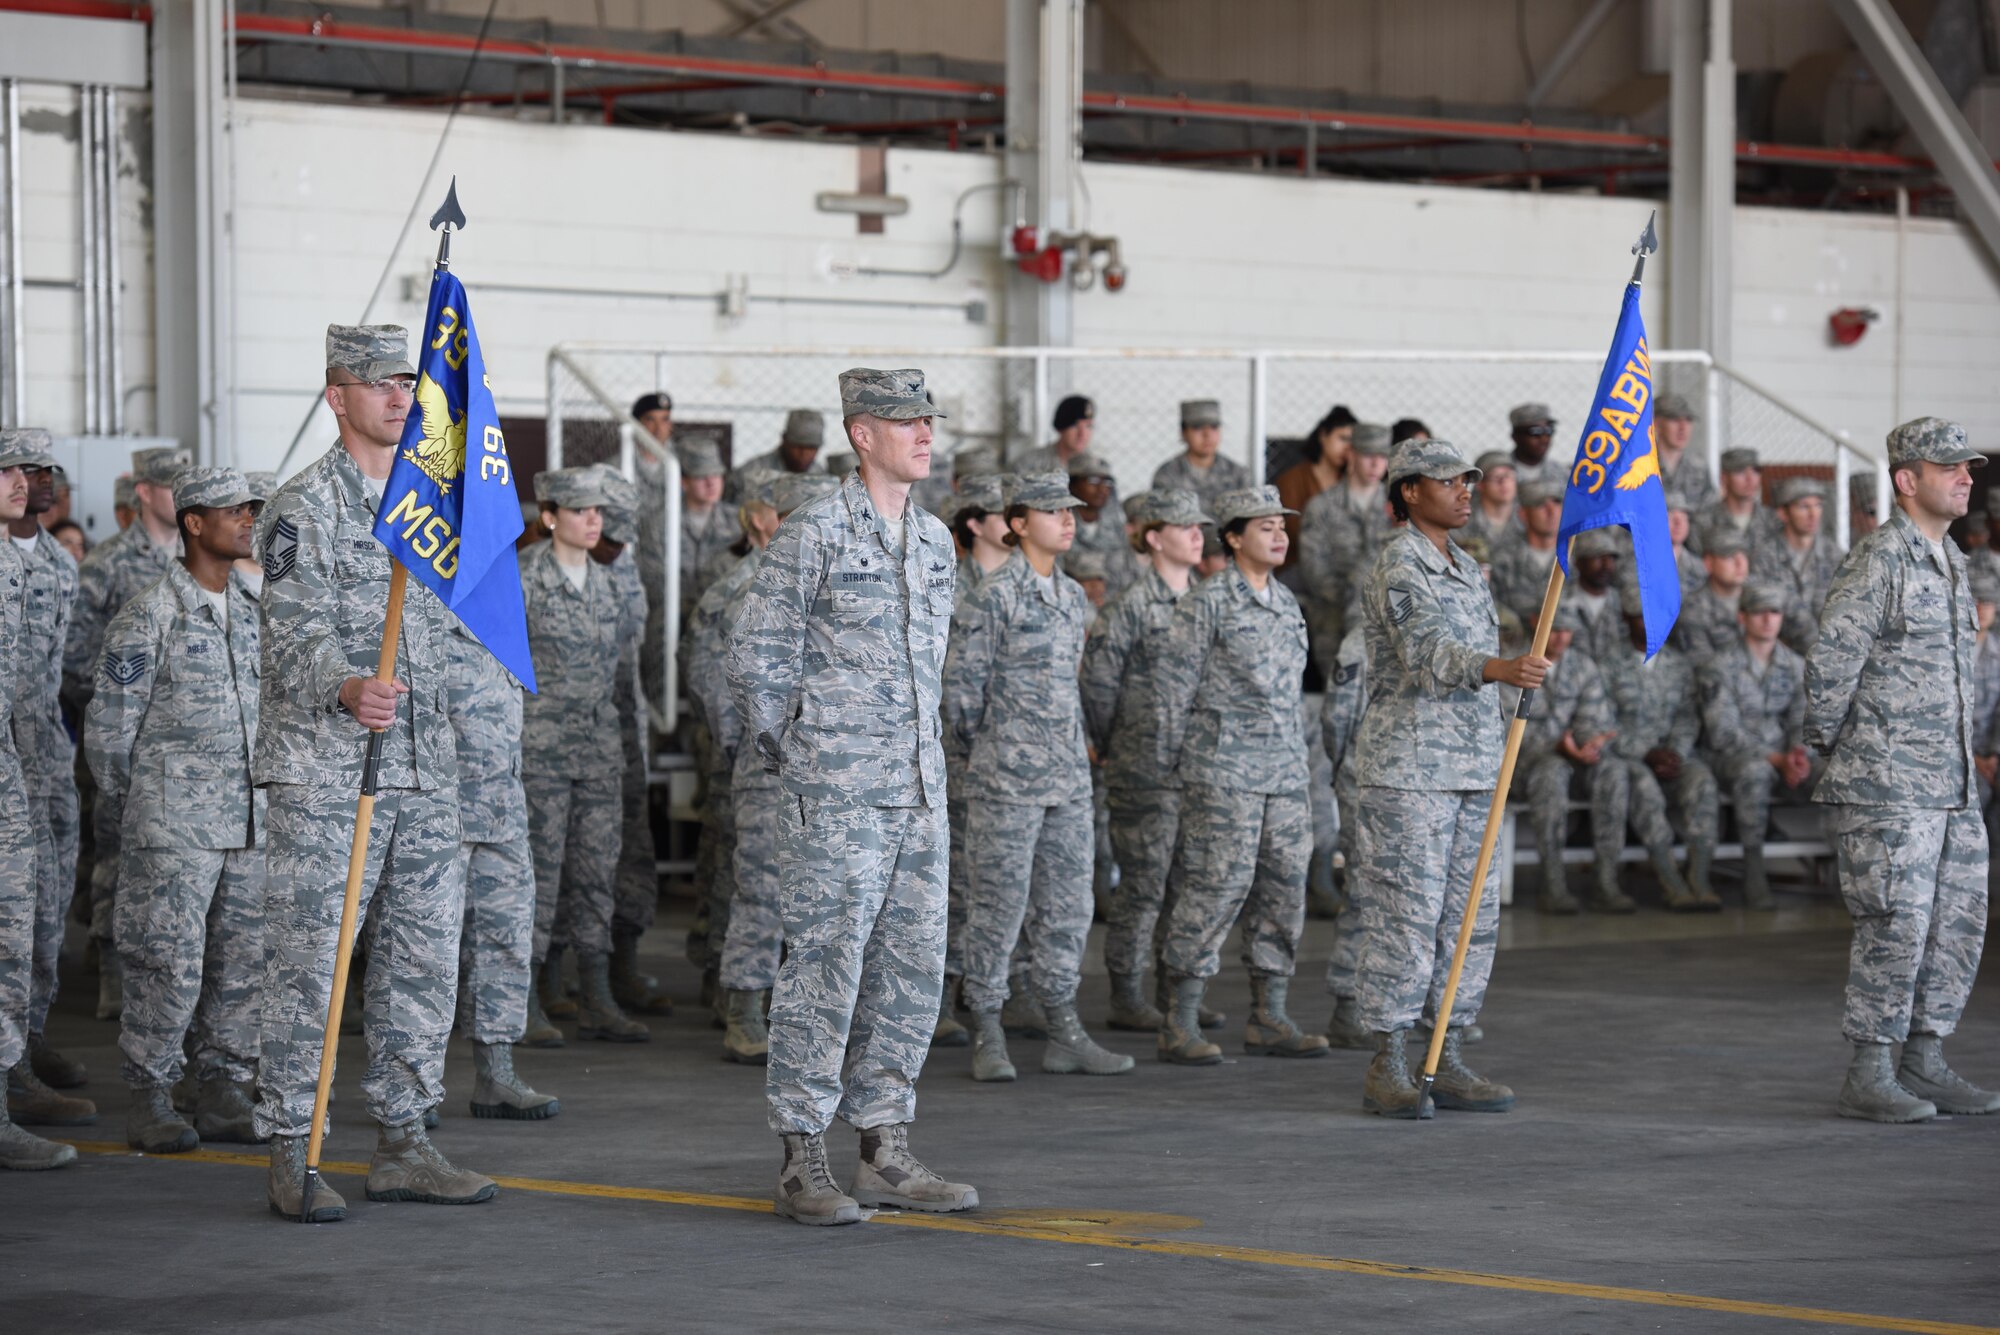 Airmen assigned to the 39th Air Base Wing participate in the 39th ABW change of command ceremony June 1, 2017, at Incirlik Air Base Turkey.  Col. John Walker relinquished command, and Col. David Eaglin assumed command of the 39th ABW. (U.S. Air Force photo by Airman 1st Class Kristan Campbell)